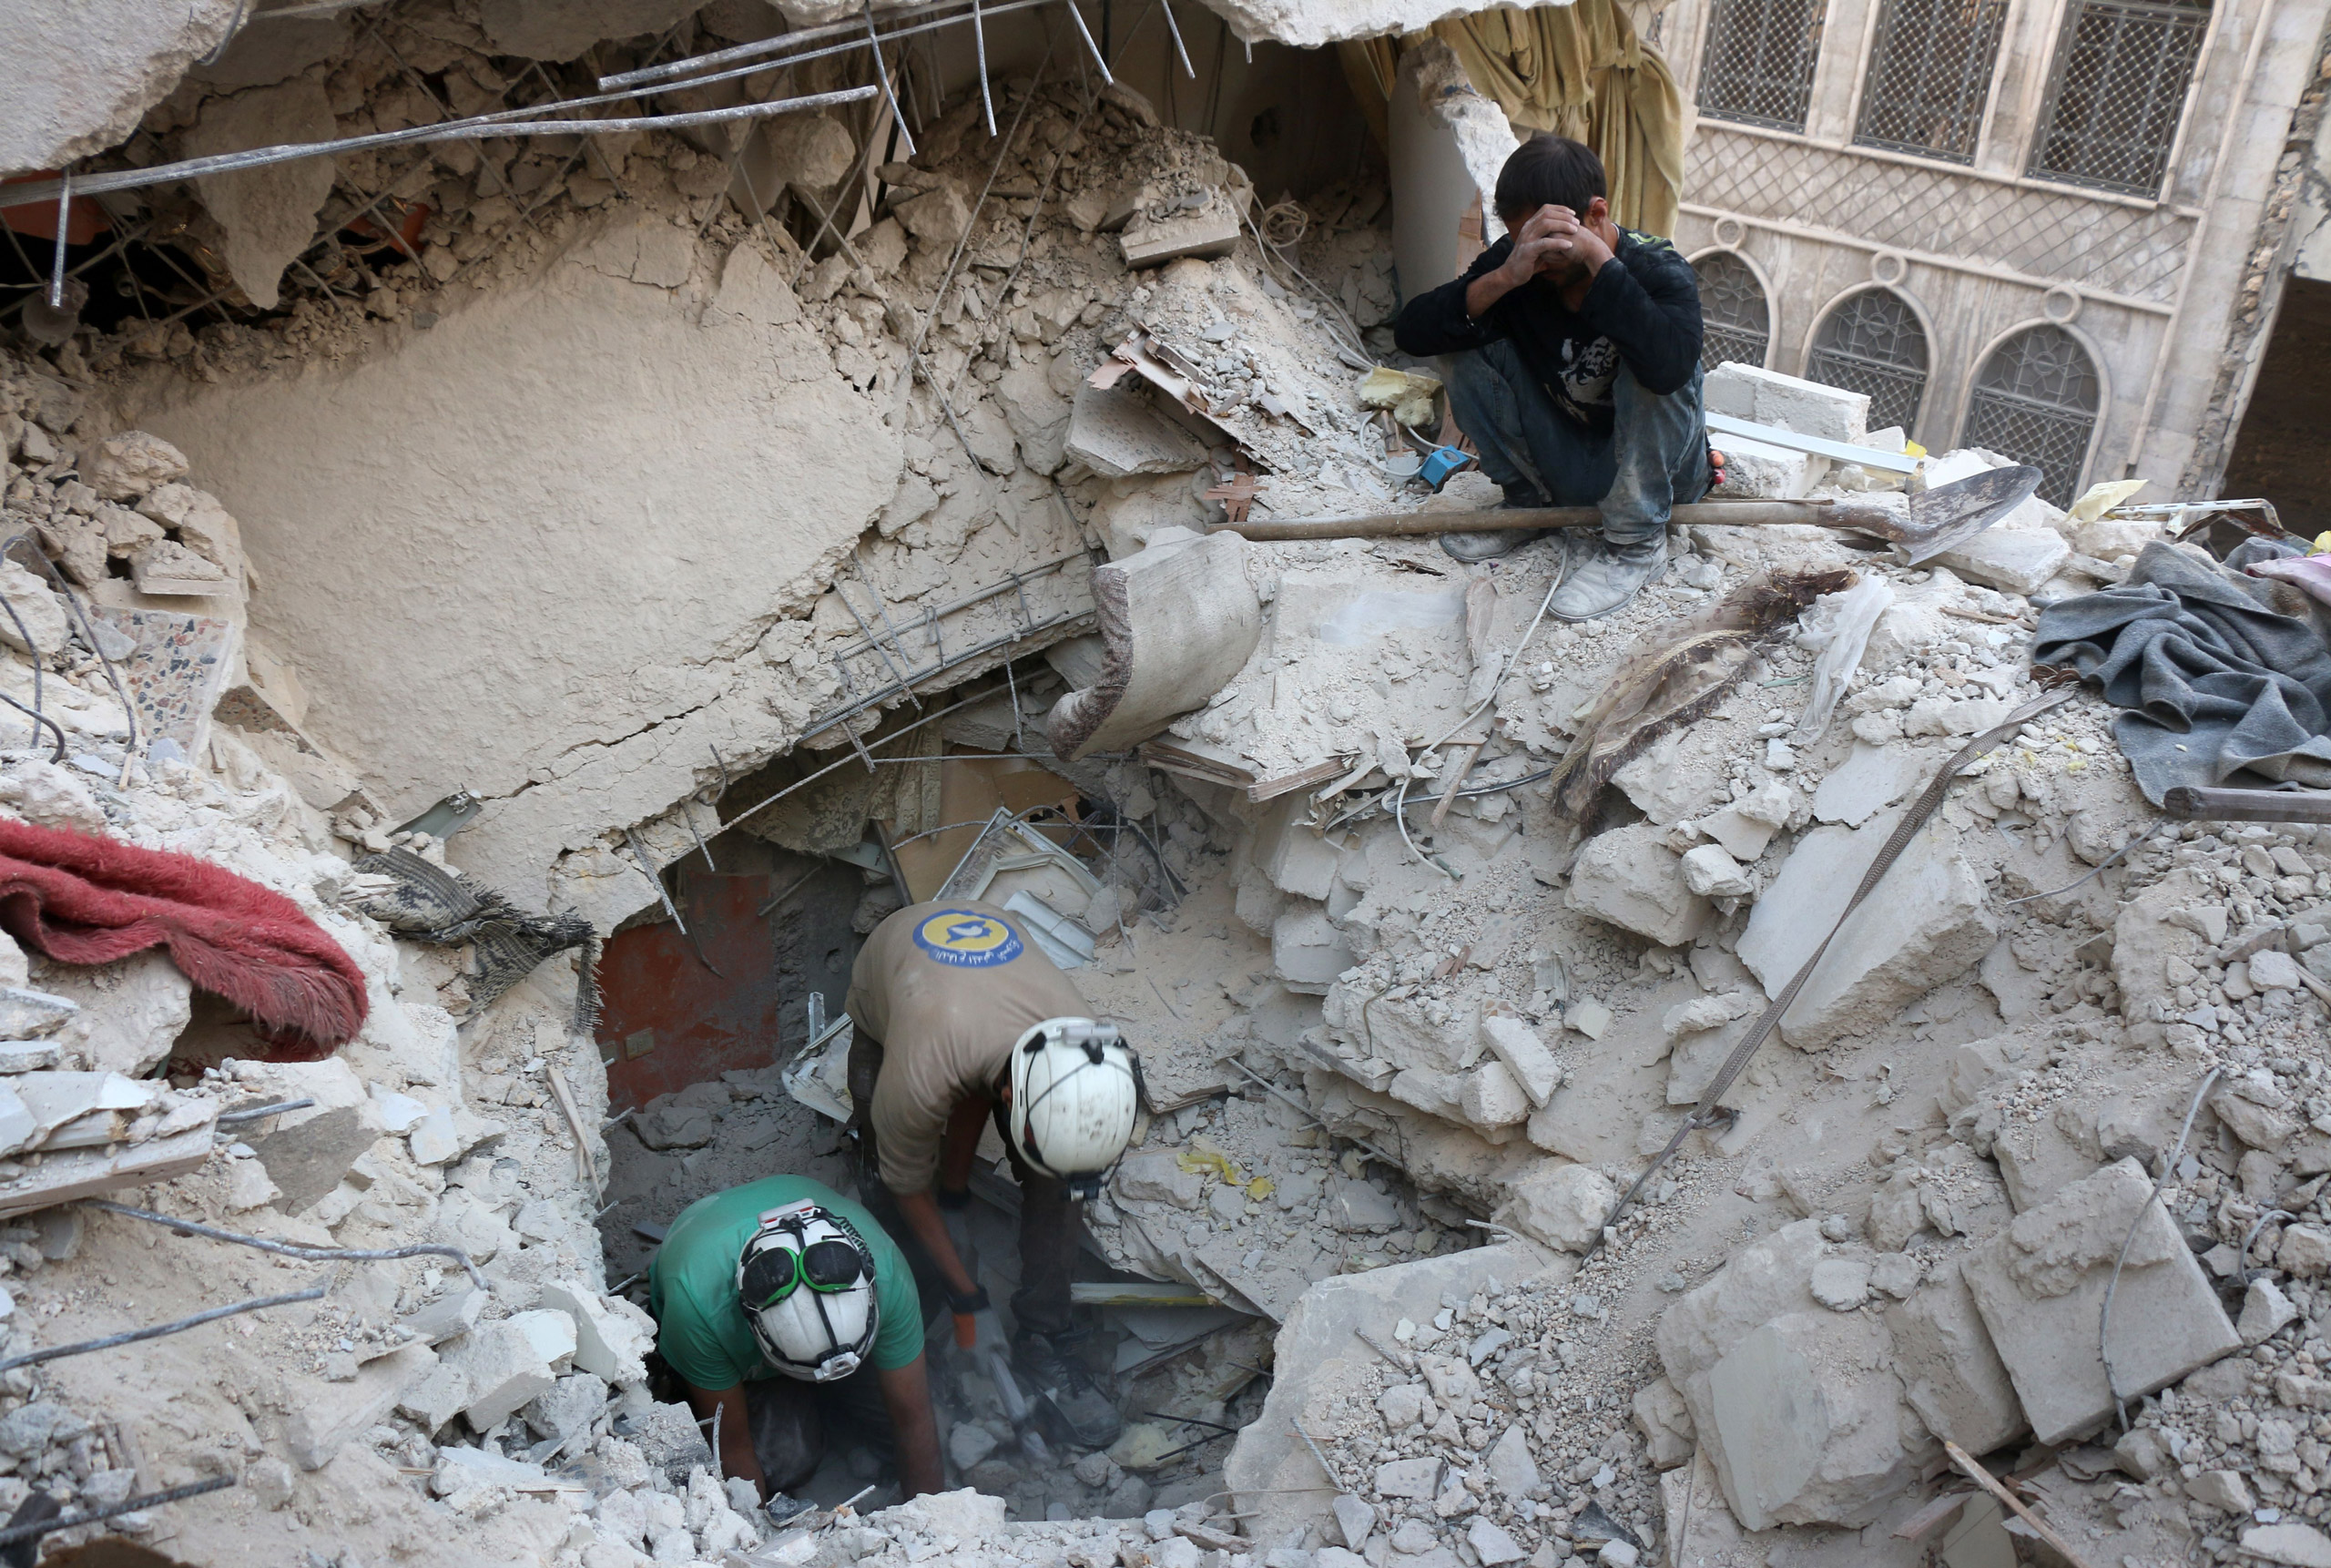 Syrian civil defence volunteers, known as the White Helmets, search for victims amid the rubble of destroyed buildings following a government forces air strike on the rebel-held neighborhood of Bustan al-Basha in Aleppo, on Oct. 4, 2016. (Thaer Mohammed—AFP/Getty Images)